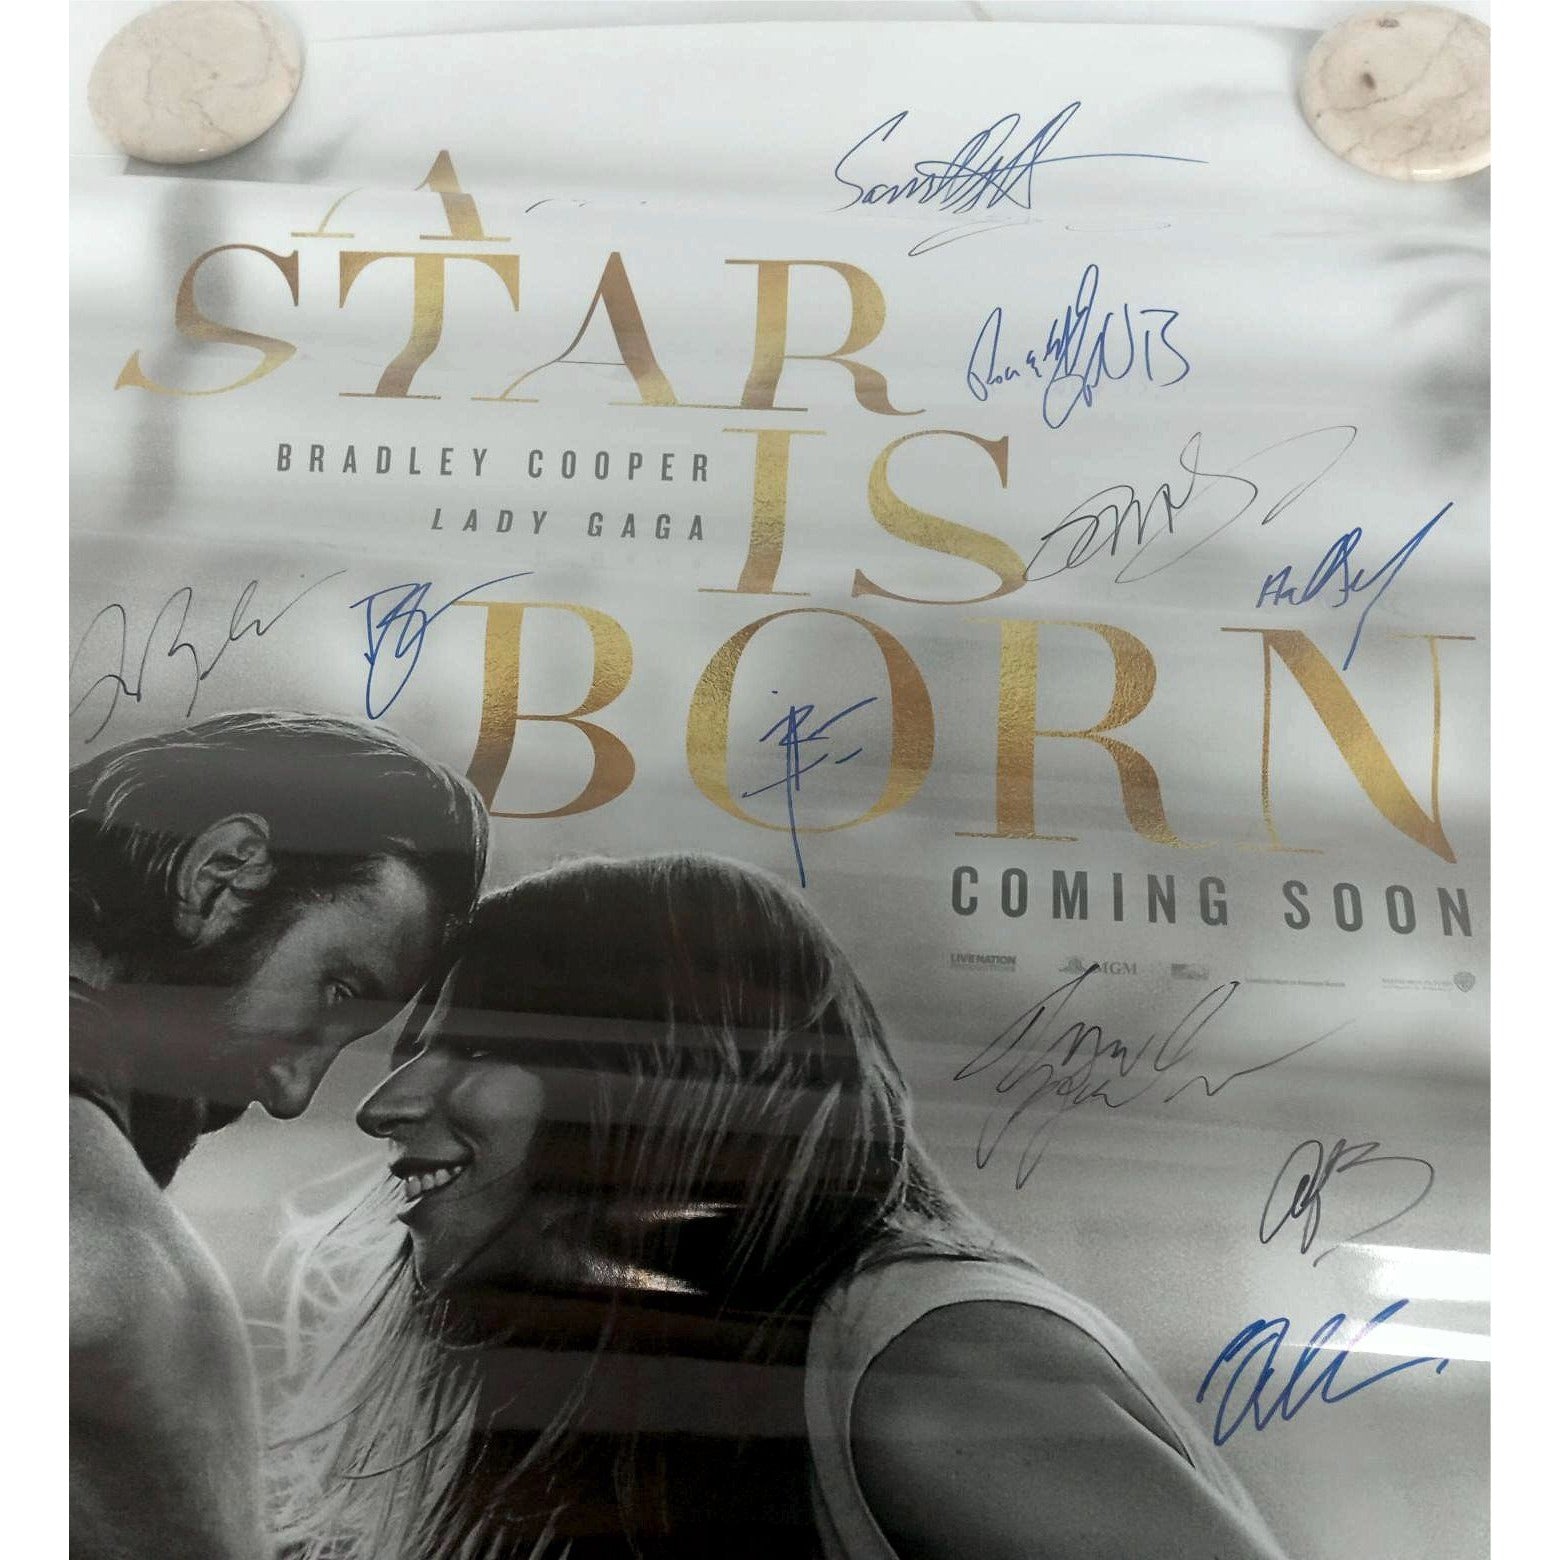 A Star is Born 24 by 36 movie poster Bradley Cooper Lady Gaga 12 sigs in all signed with proof